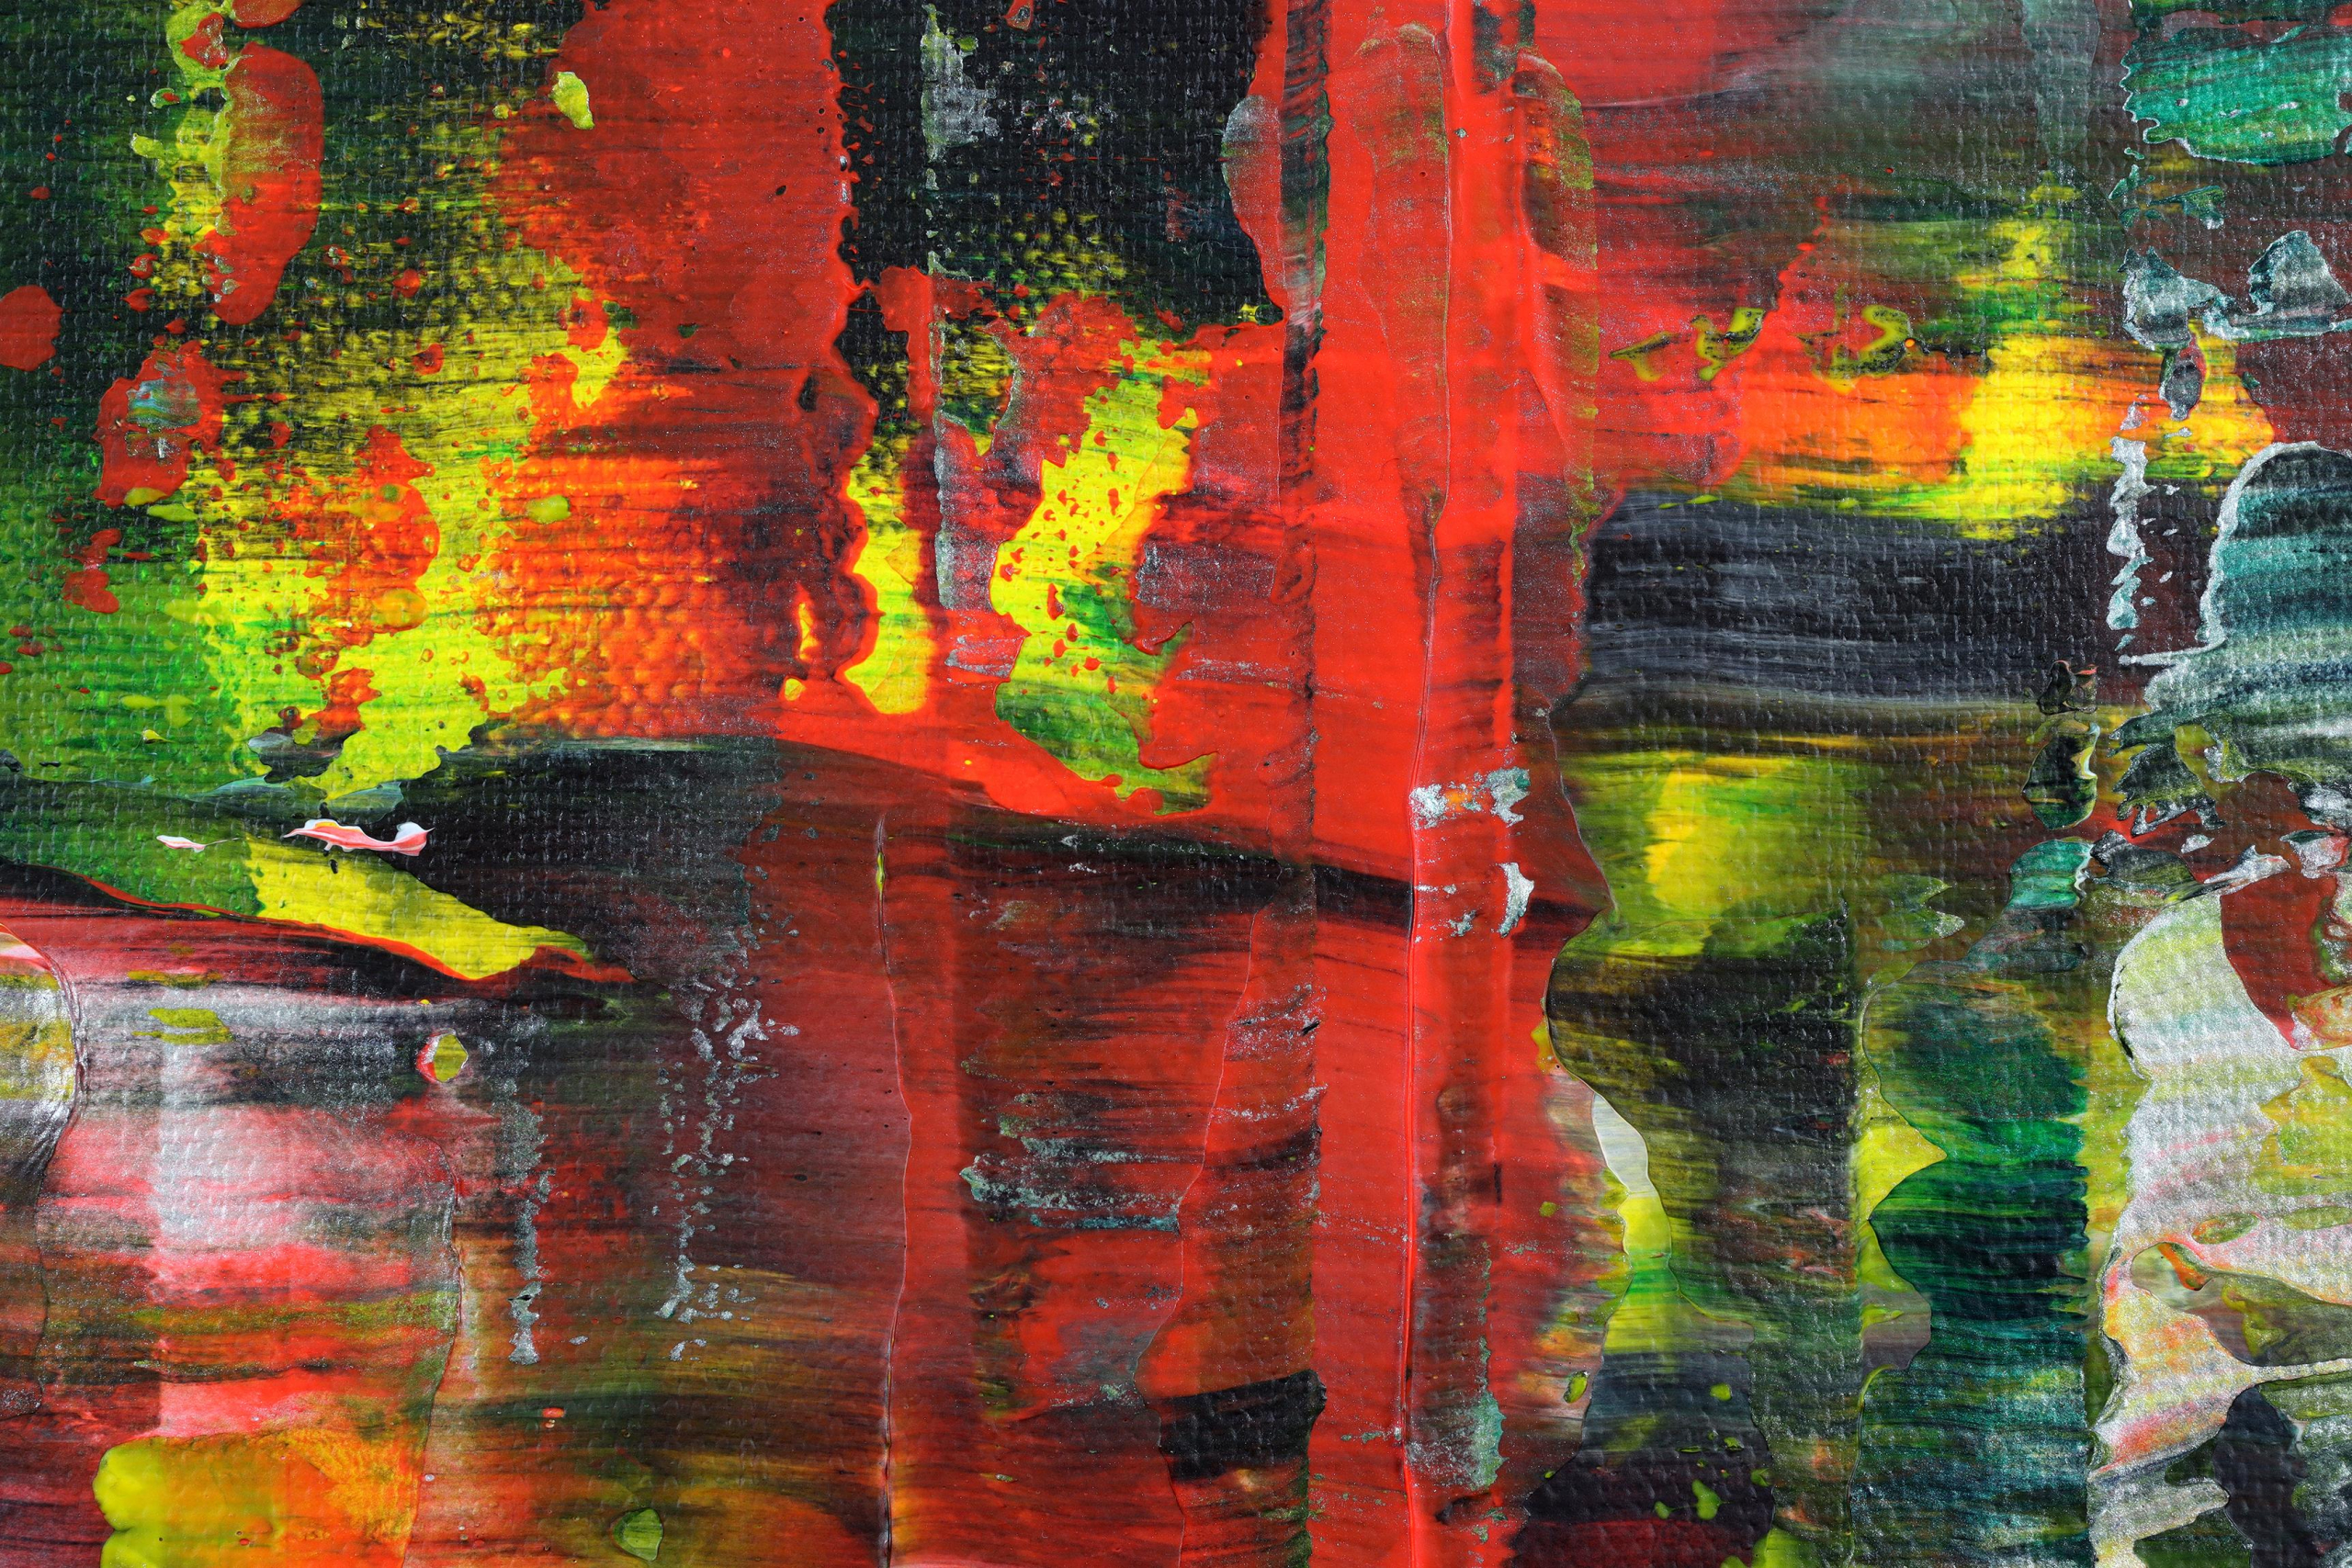 DETAIL / Bouncing Reflections (2022) 30x40 inches / Nestor Toro | SOLD